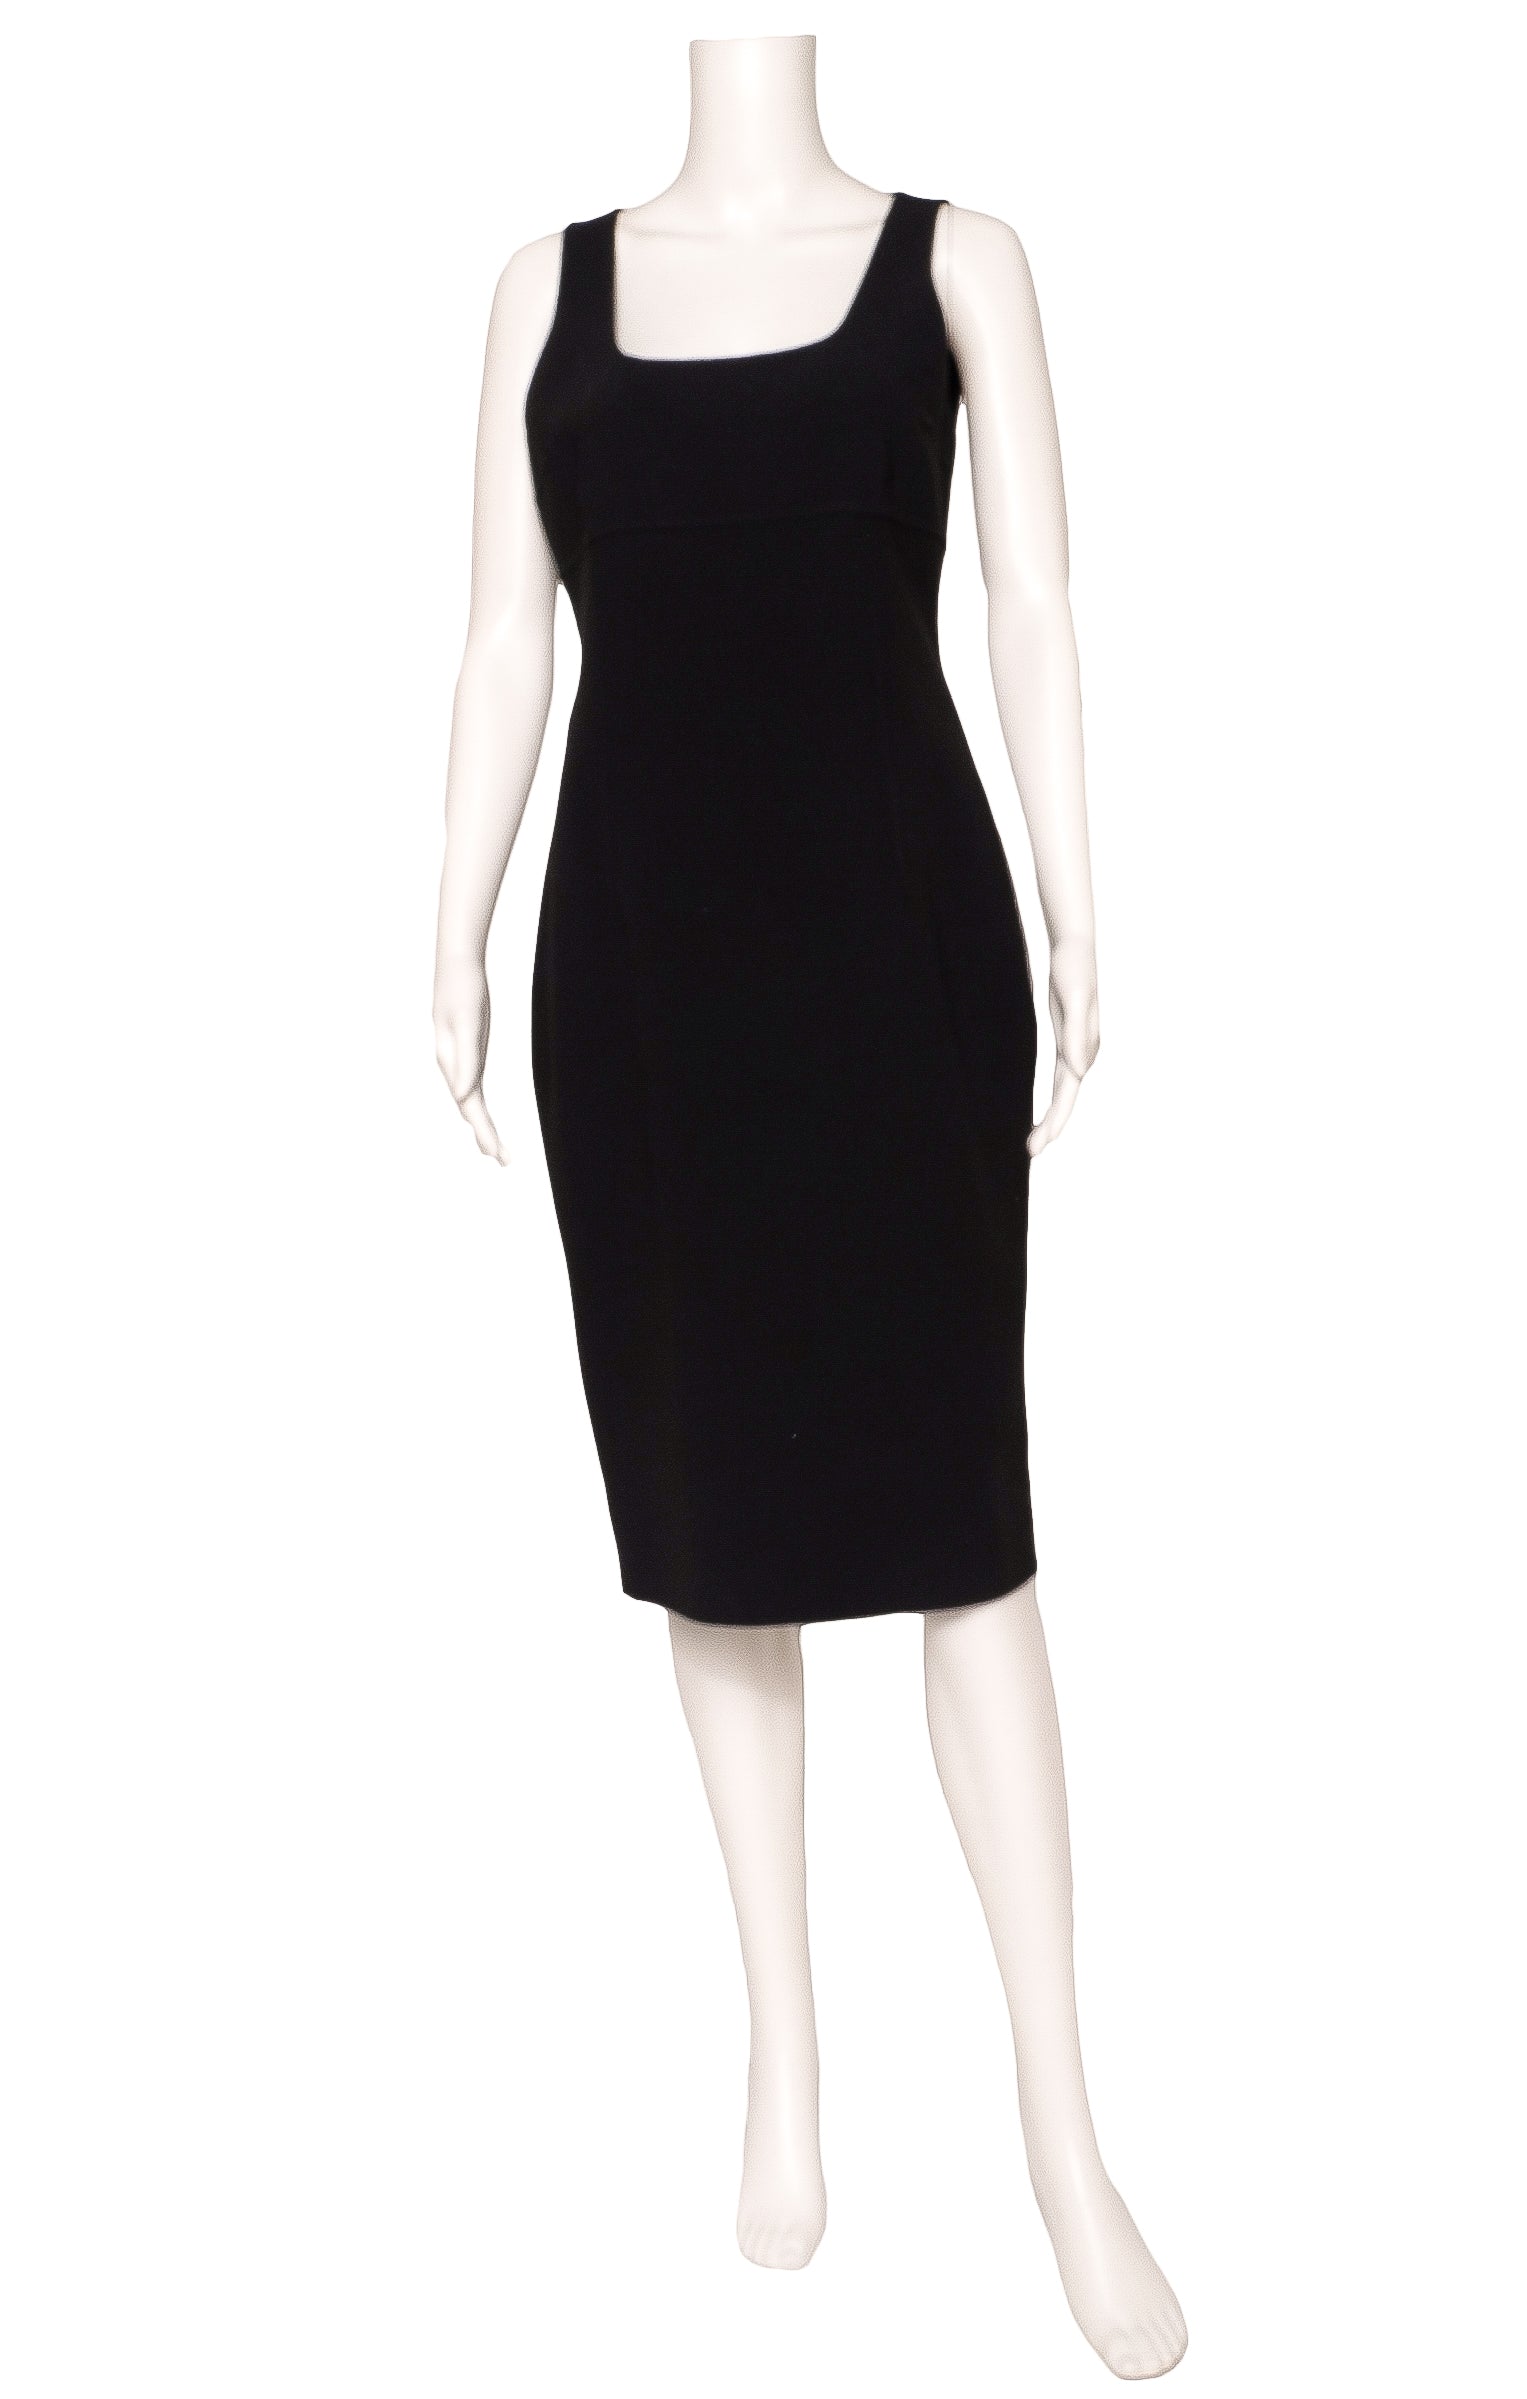 MICHAEL KORS with tags Dress Size: 8